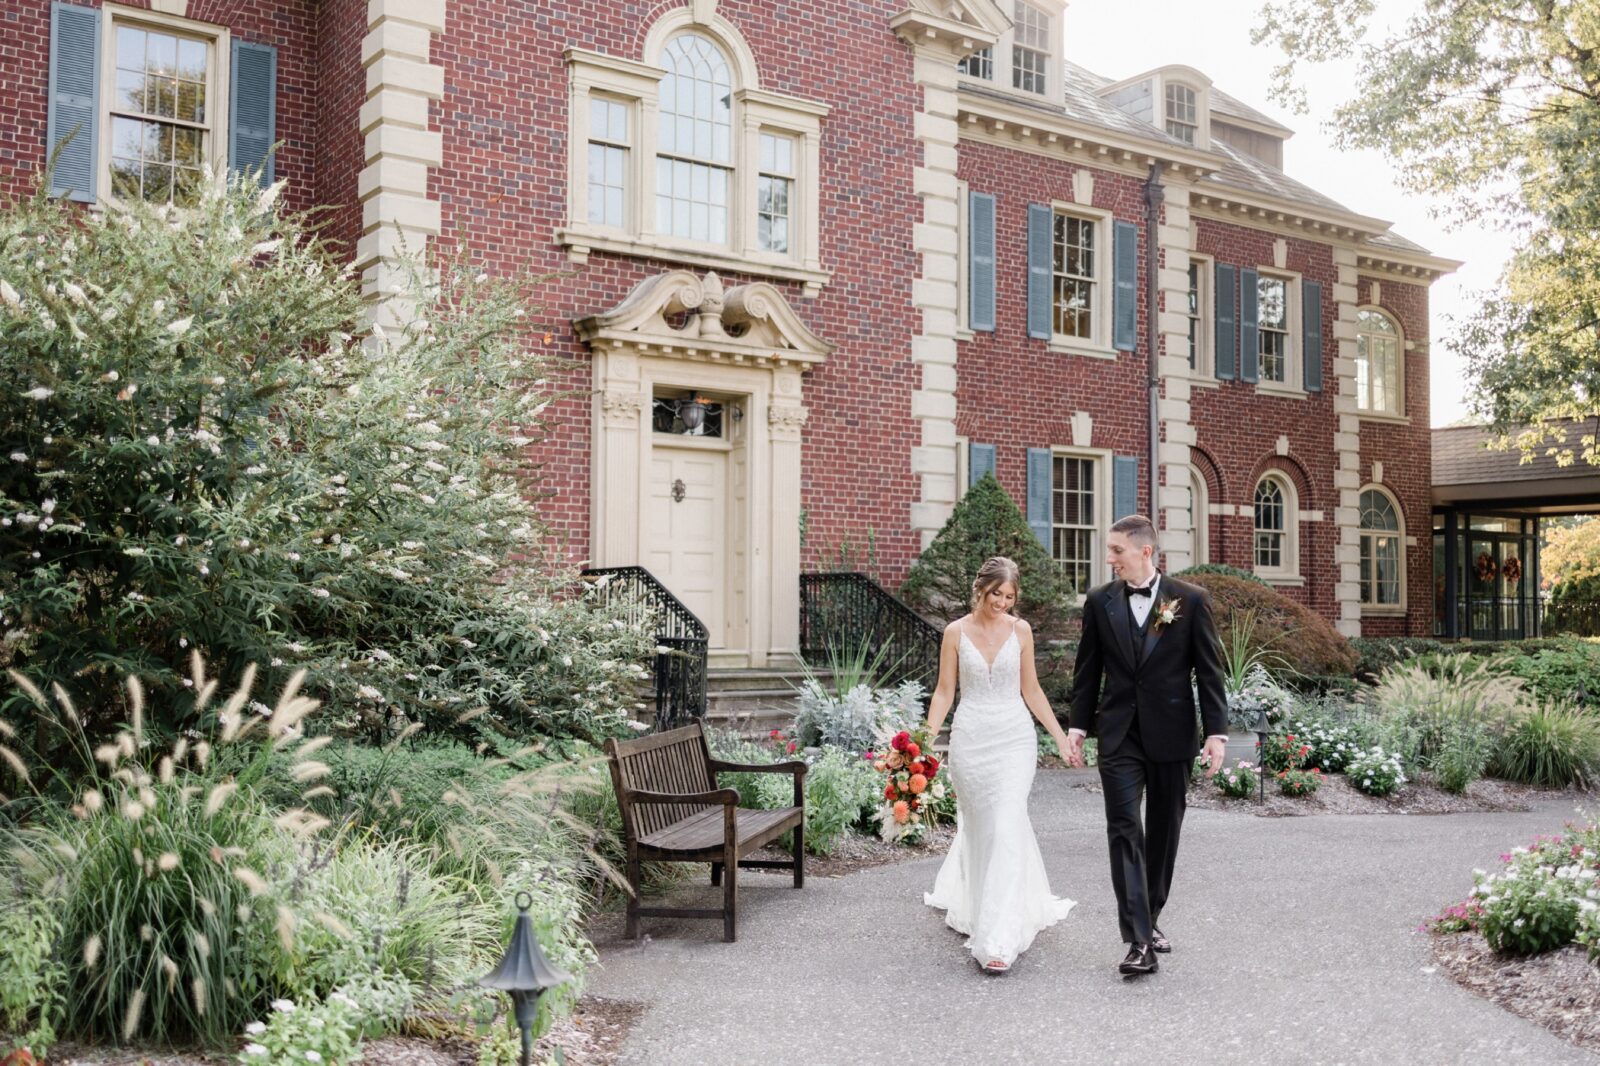 Bride and groom walking on the path behind the mansion - Box Hill Mansion wedding